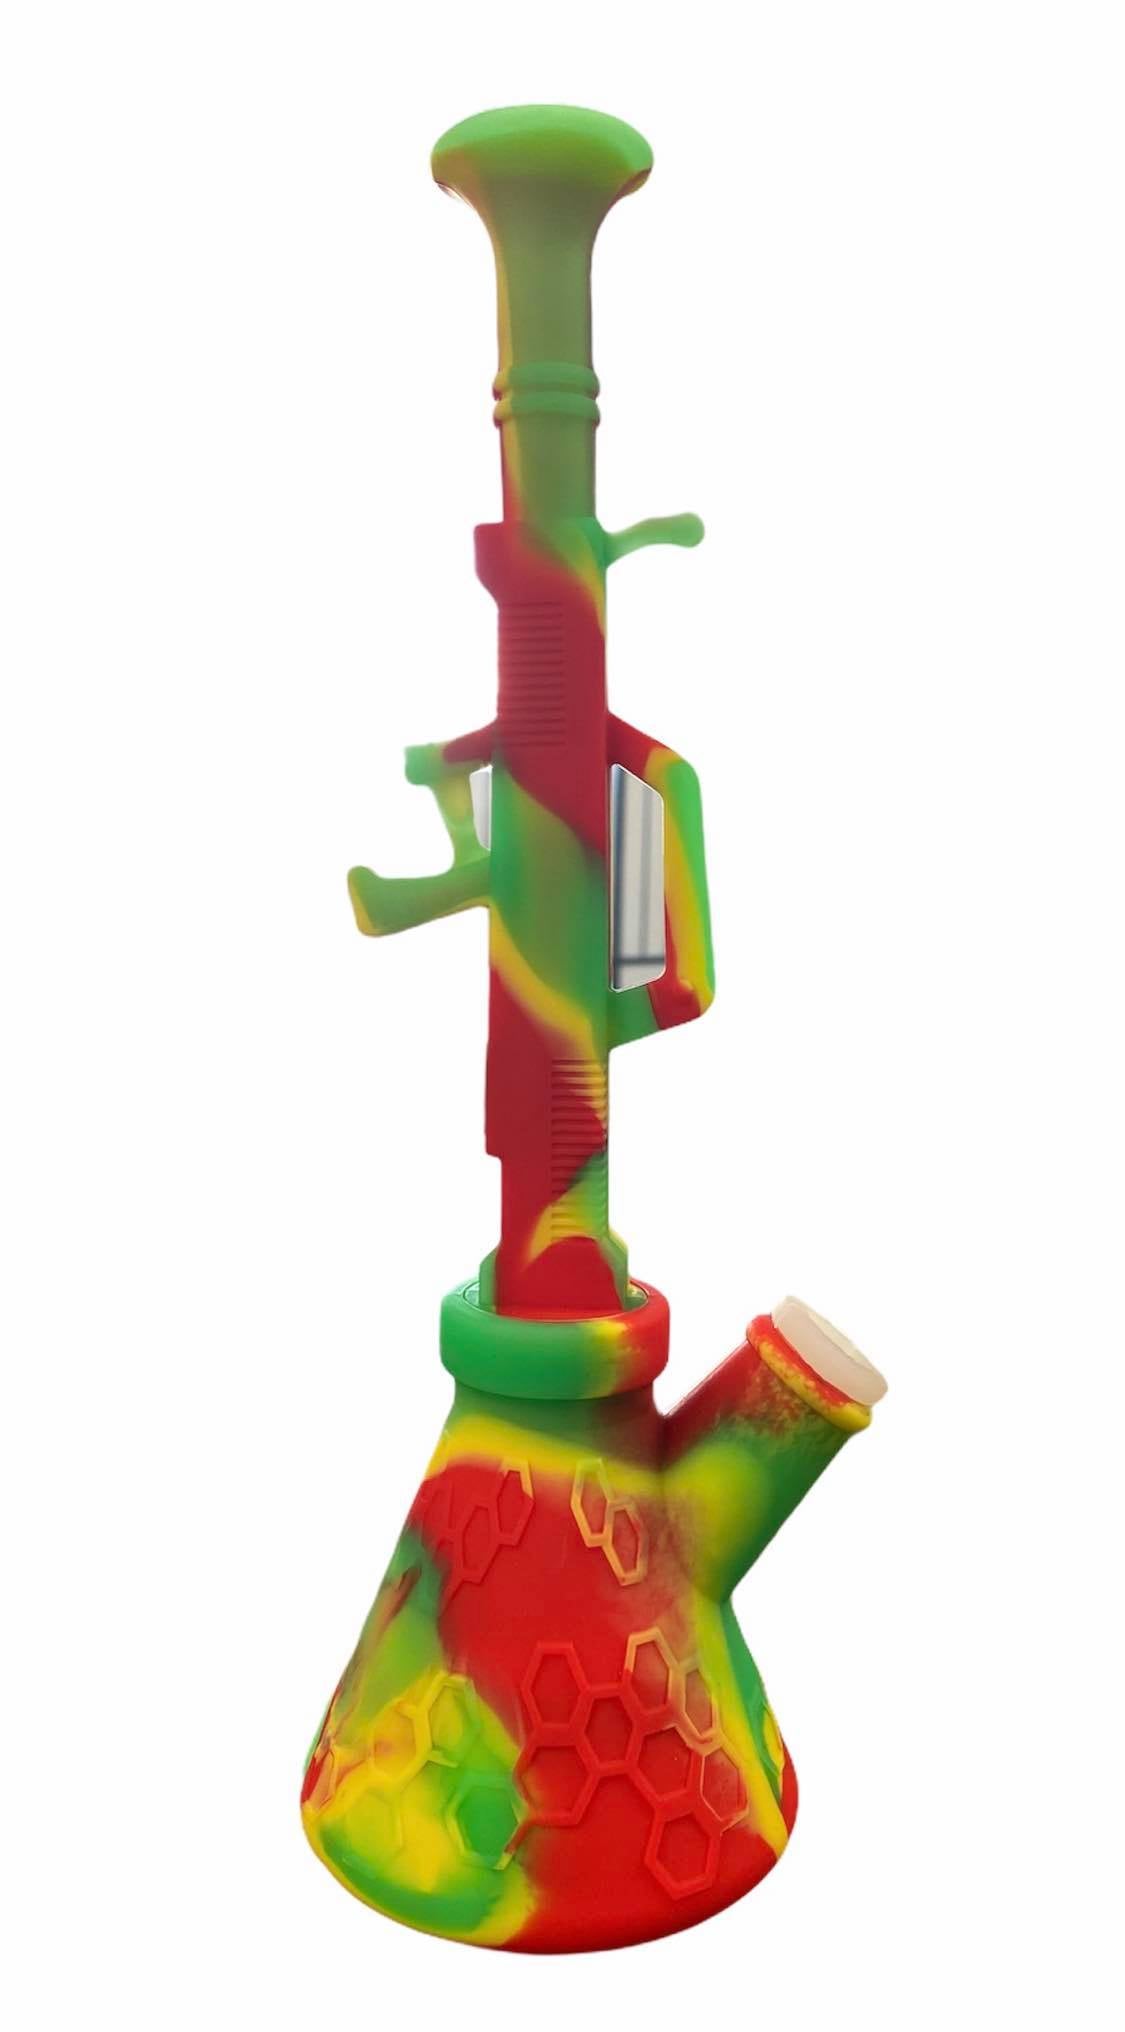 SILICONE AK47 WATERPIPE, VARIOUS COLORS